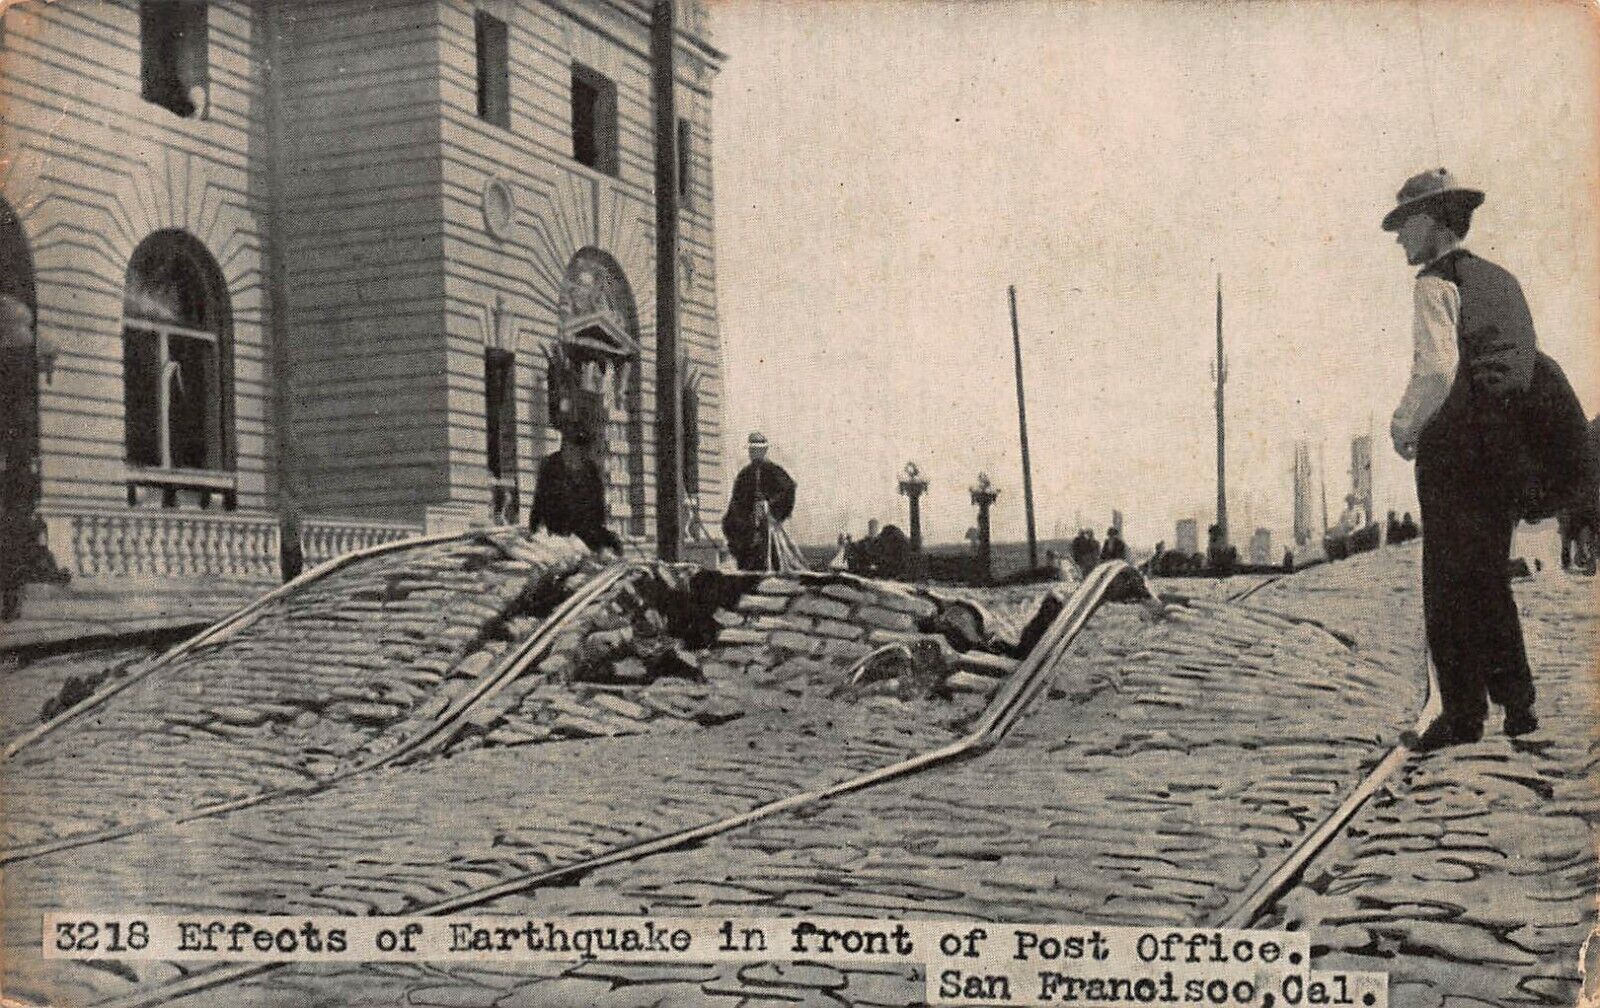 Effects of Earthquake in Front of Post Office, San Francisco, CA., 1906 Postcard